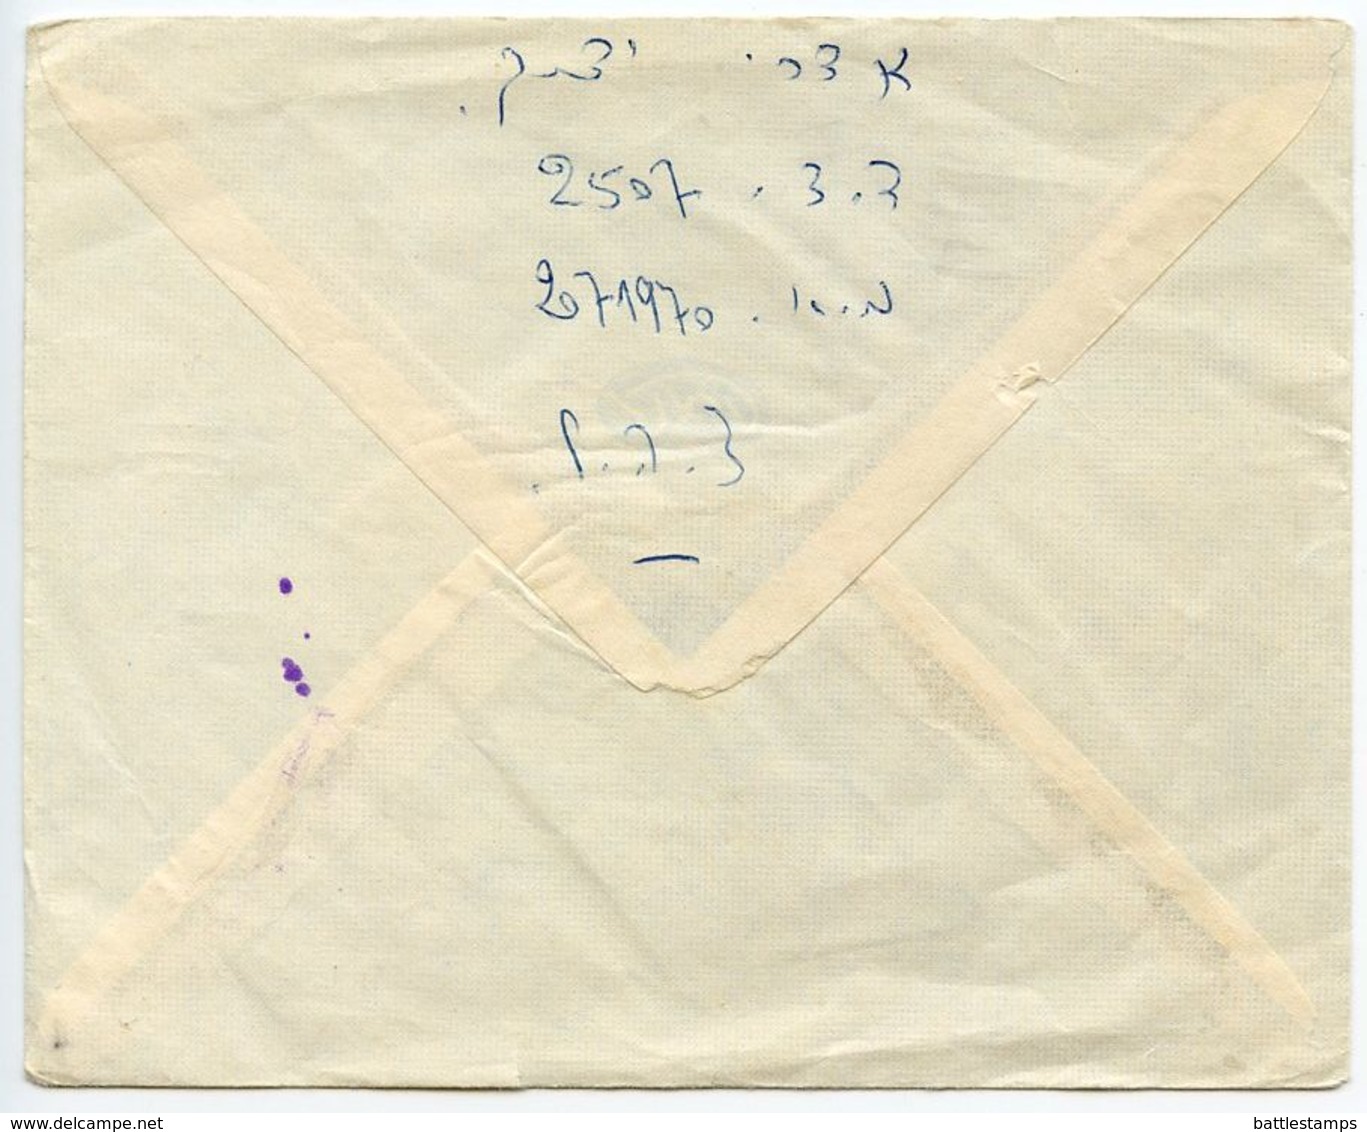 Israel 1960's Military Cover Unit 2507 To Tel Aviv - Military Mail Service